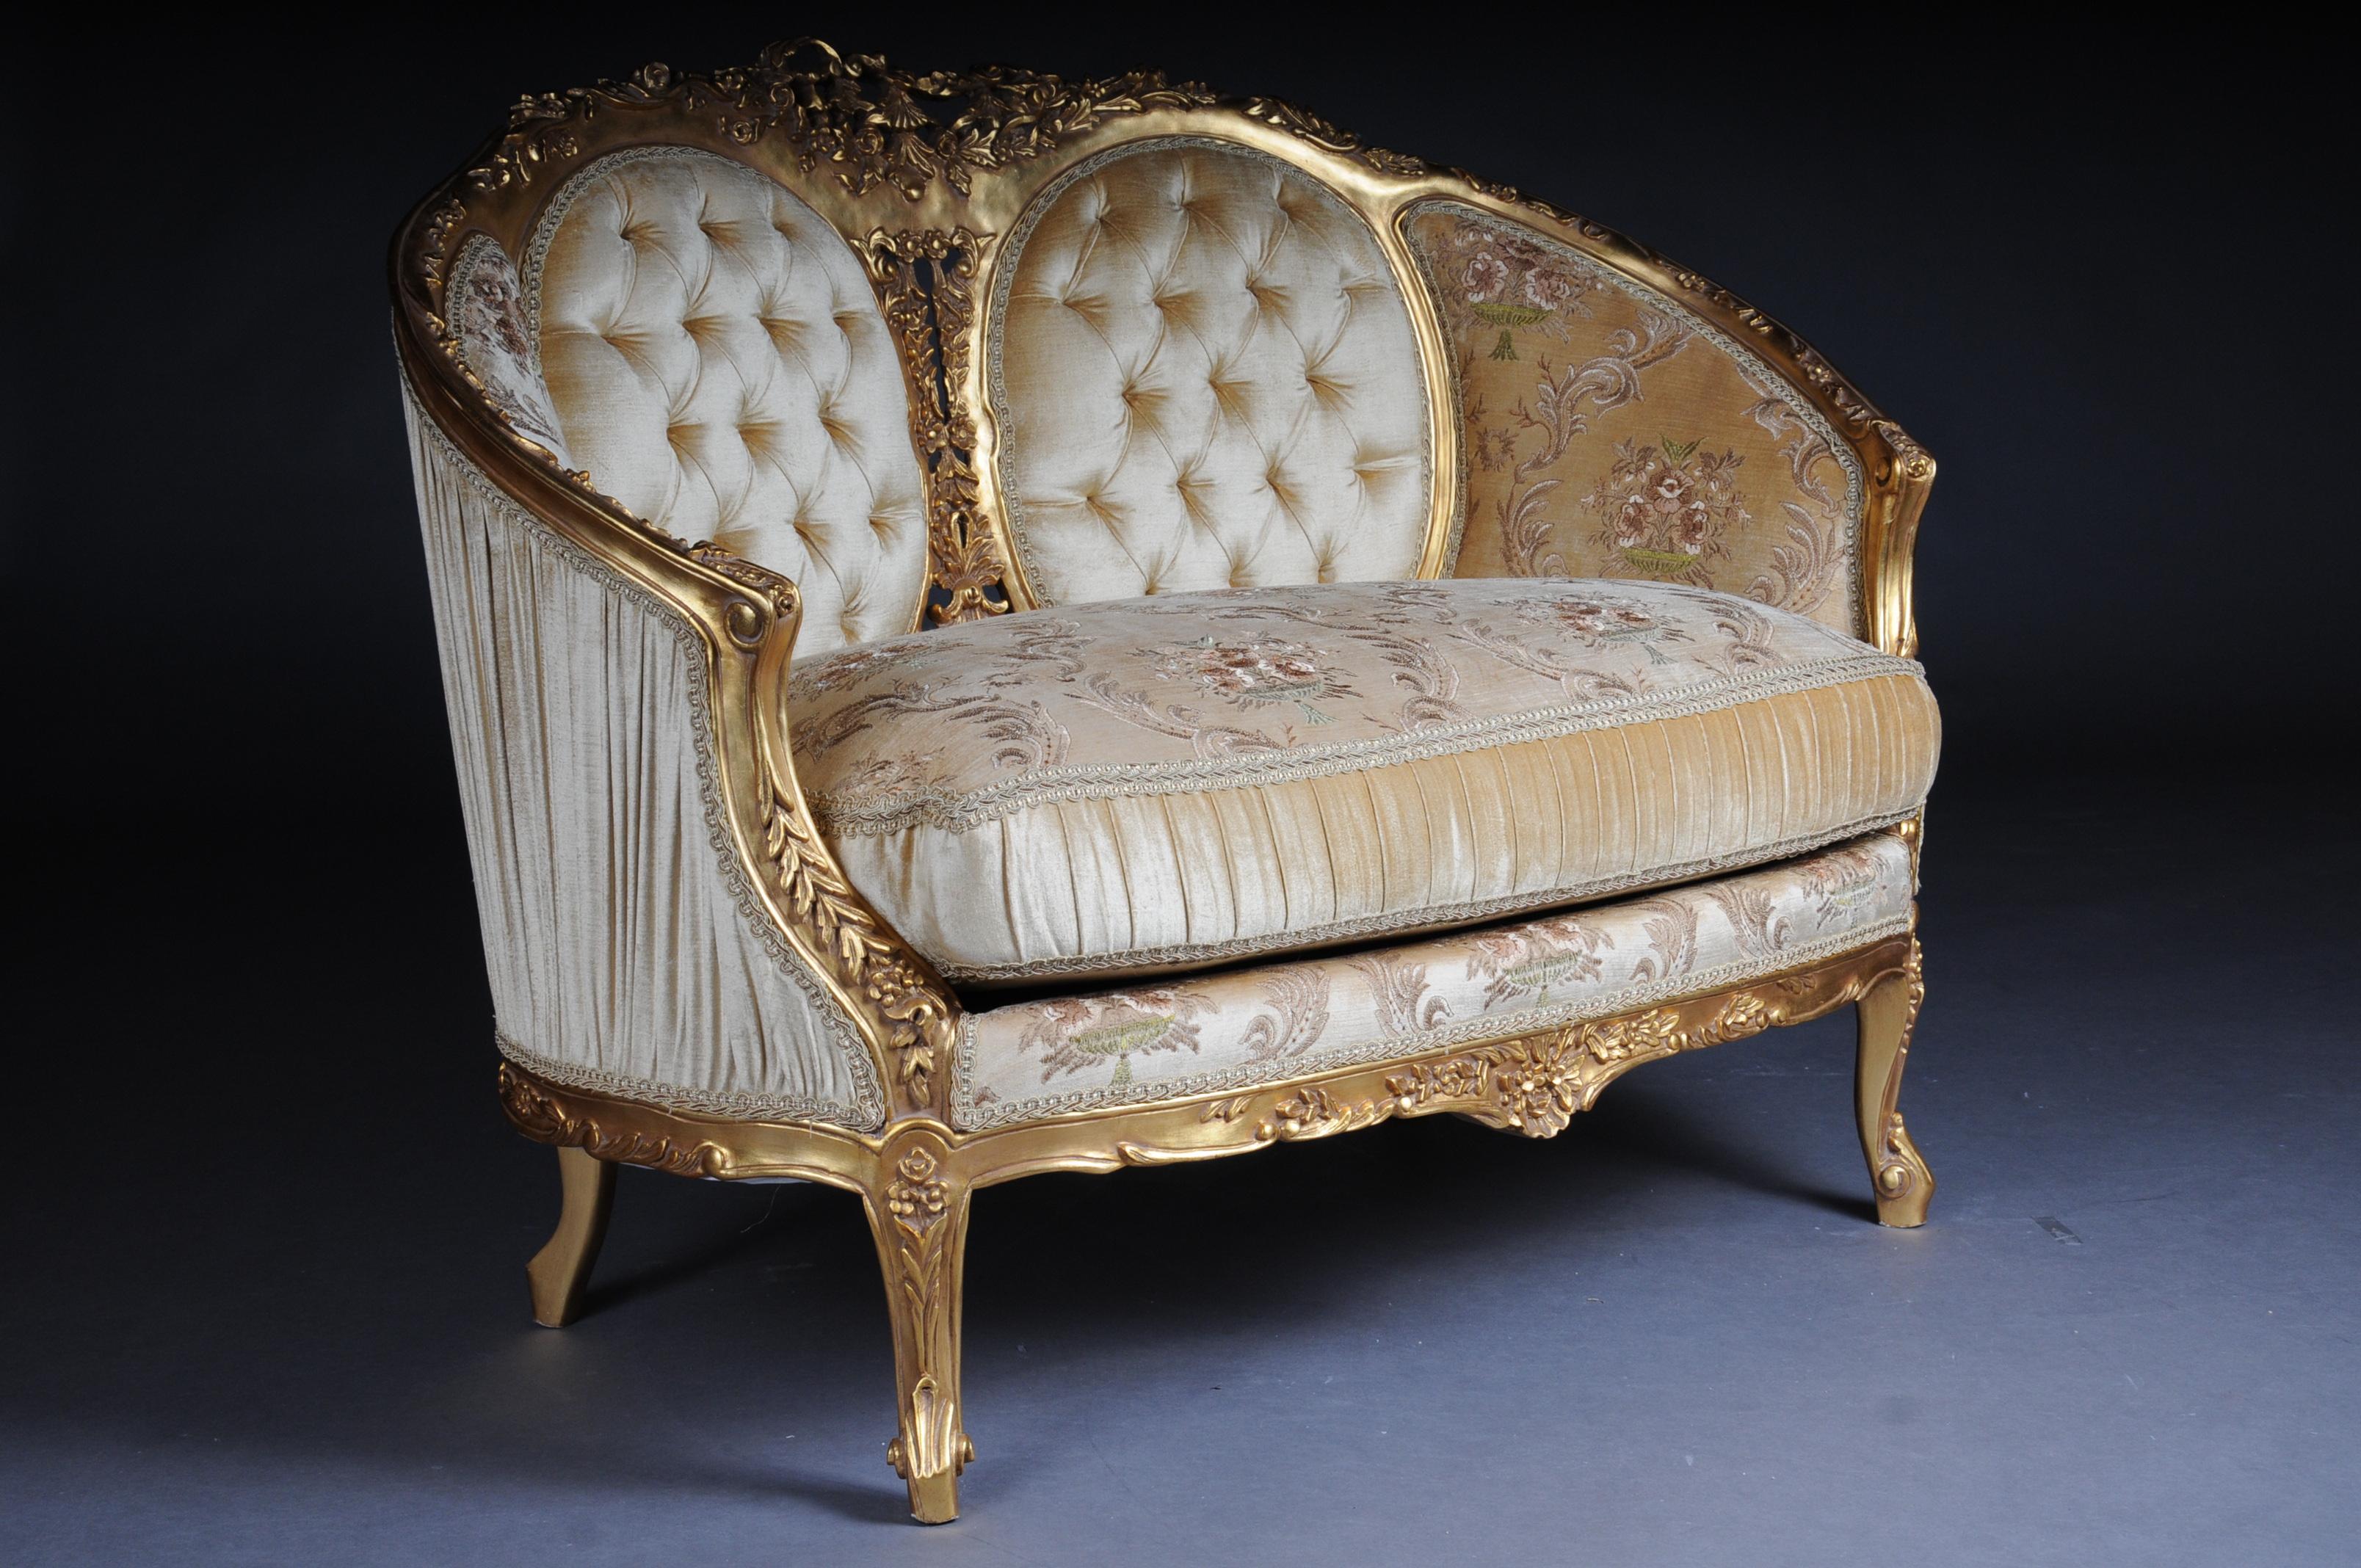 French sofa, canapé, couch in Rococo or Louis XV style.

Solid beech wood, carved and gilded. Semicircular rising backrest framing with openwork rocaille crowning. Appropriately curved frame with richly carved foliage. Slightly curved frame on